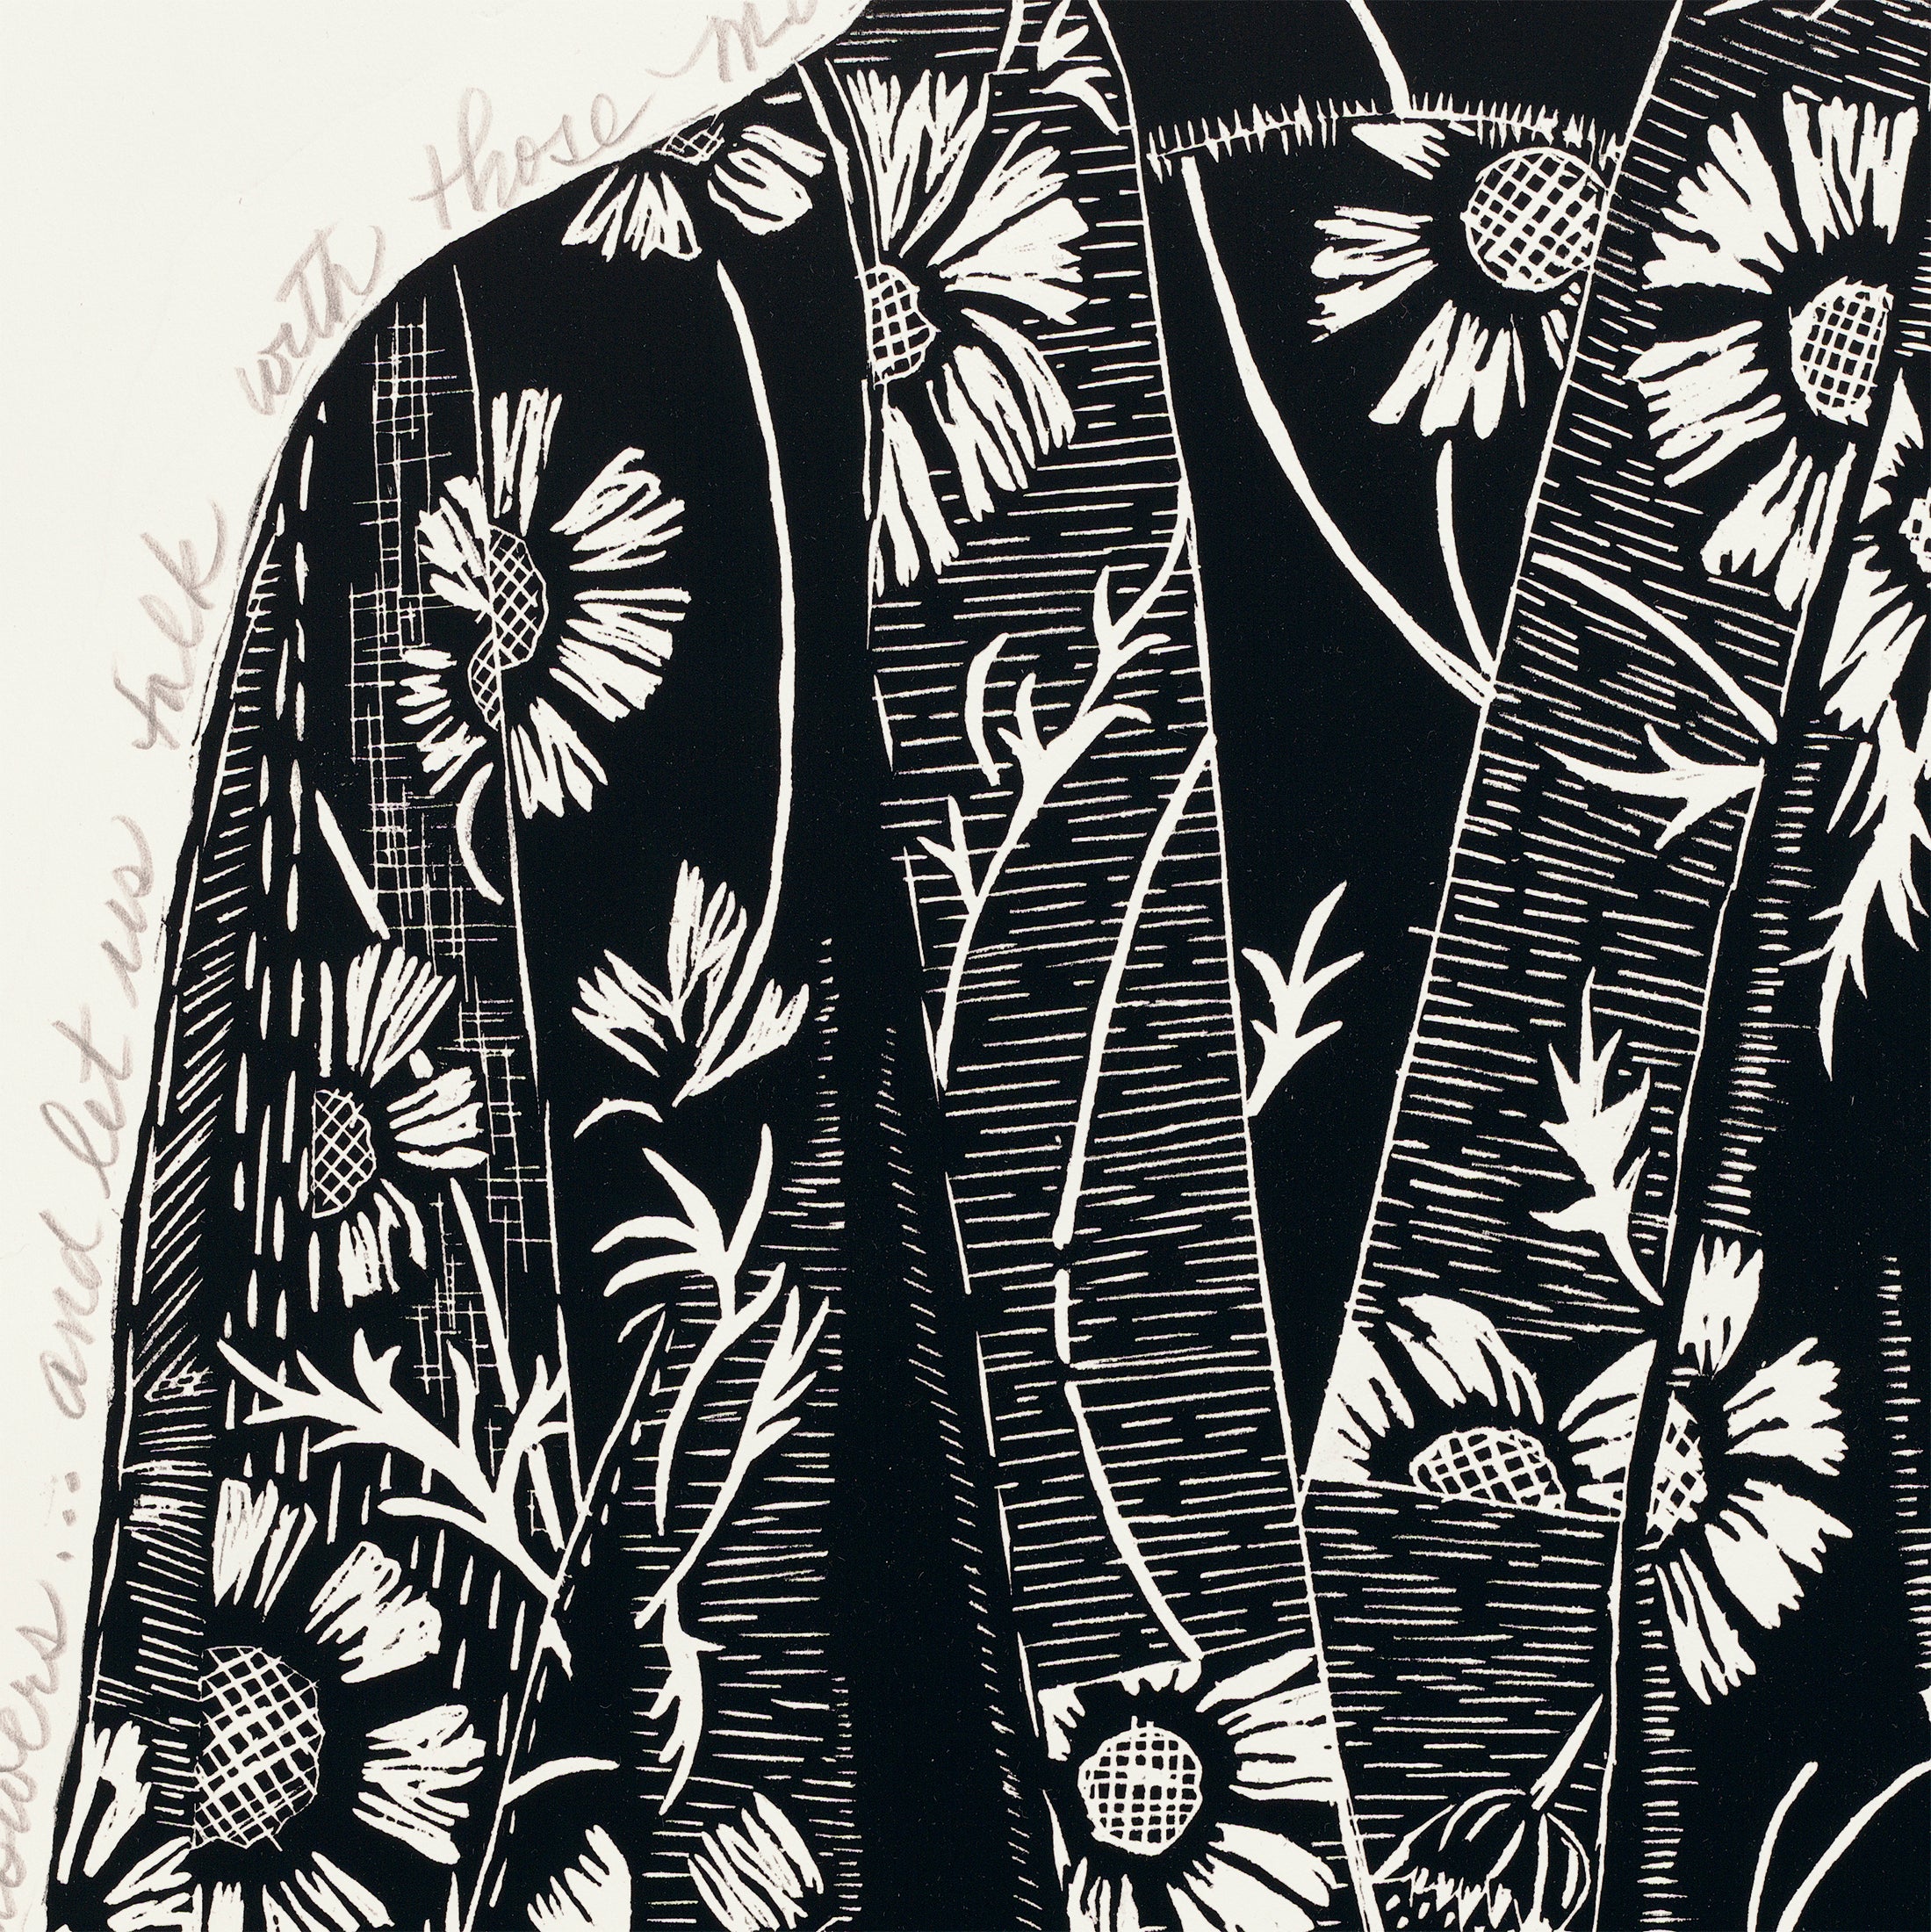 detail Sunflower Kimono, hand printed in black ink on Japanese paper, for sale by Ouida Touchon